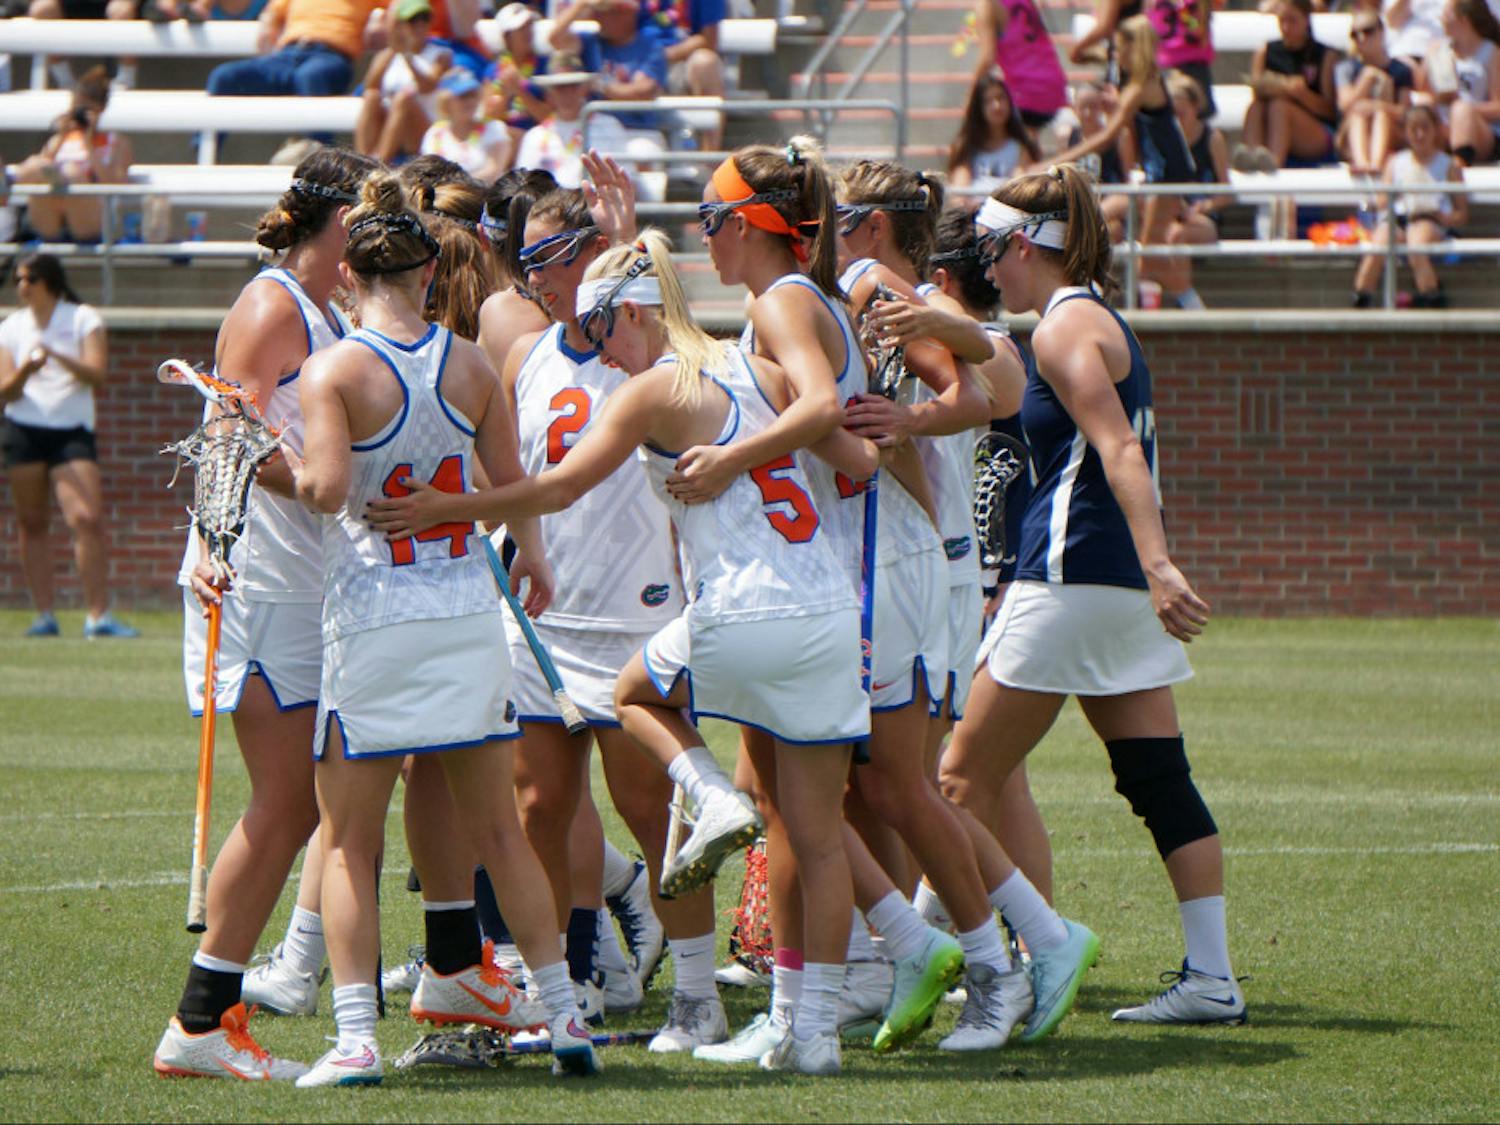 Florida lacrosse players celebrate after a goal during UF's 18-4 win against Georgetown on April 4 at Donald R. Dizney Stadium.